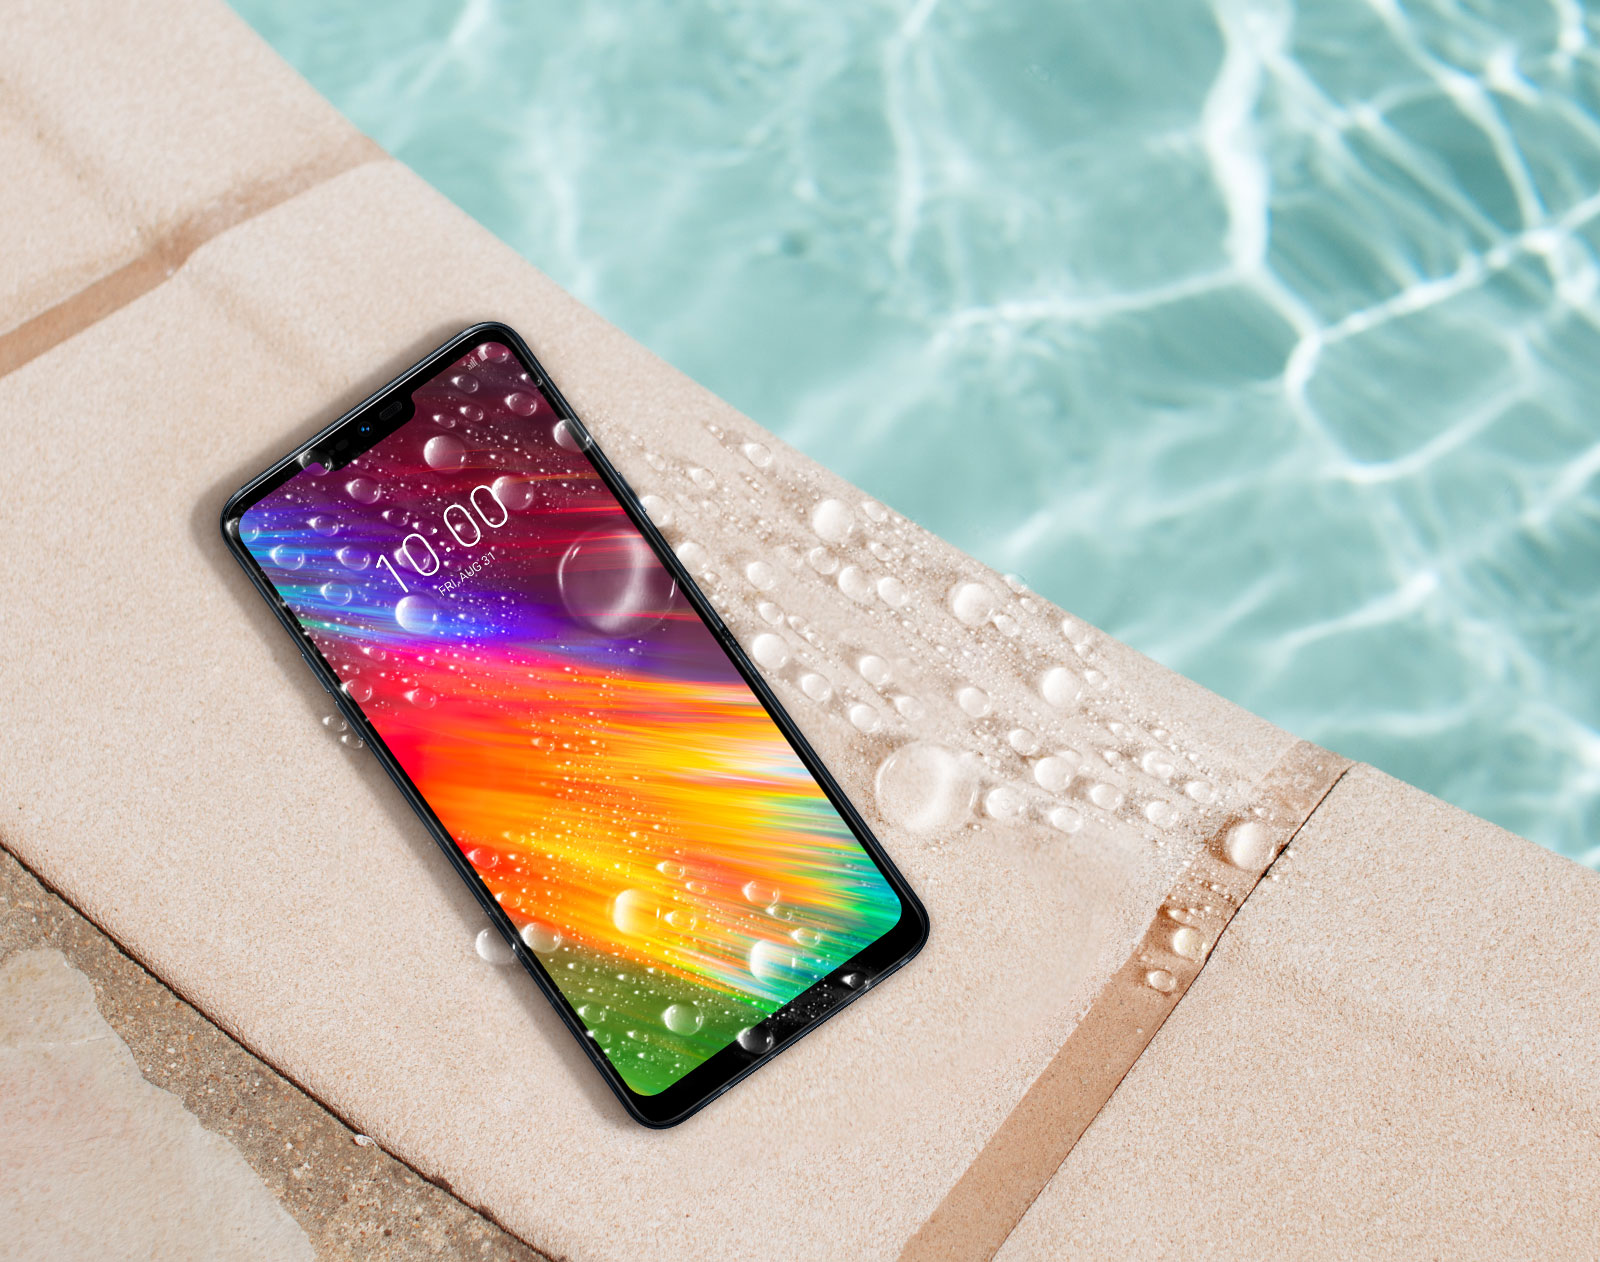 Android Pie in arrivo in autunno su LG G7 fit, Q7 e G6 thumbnail